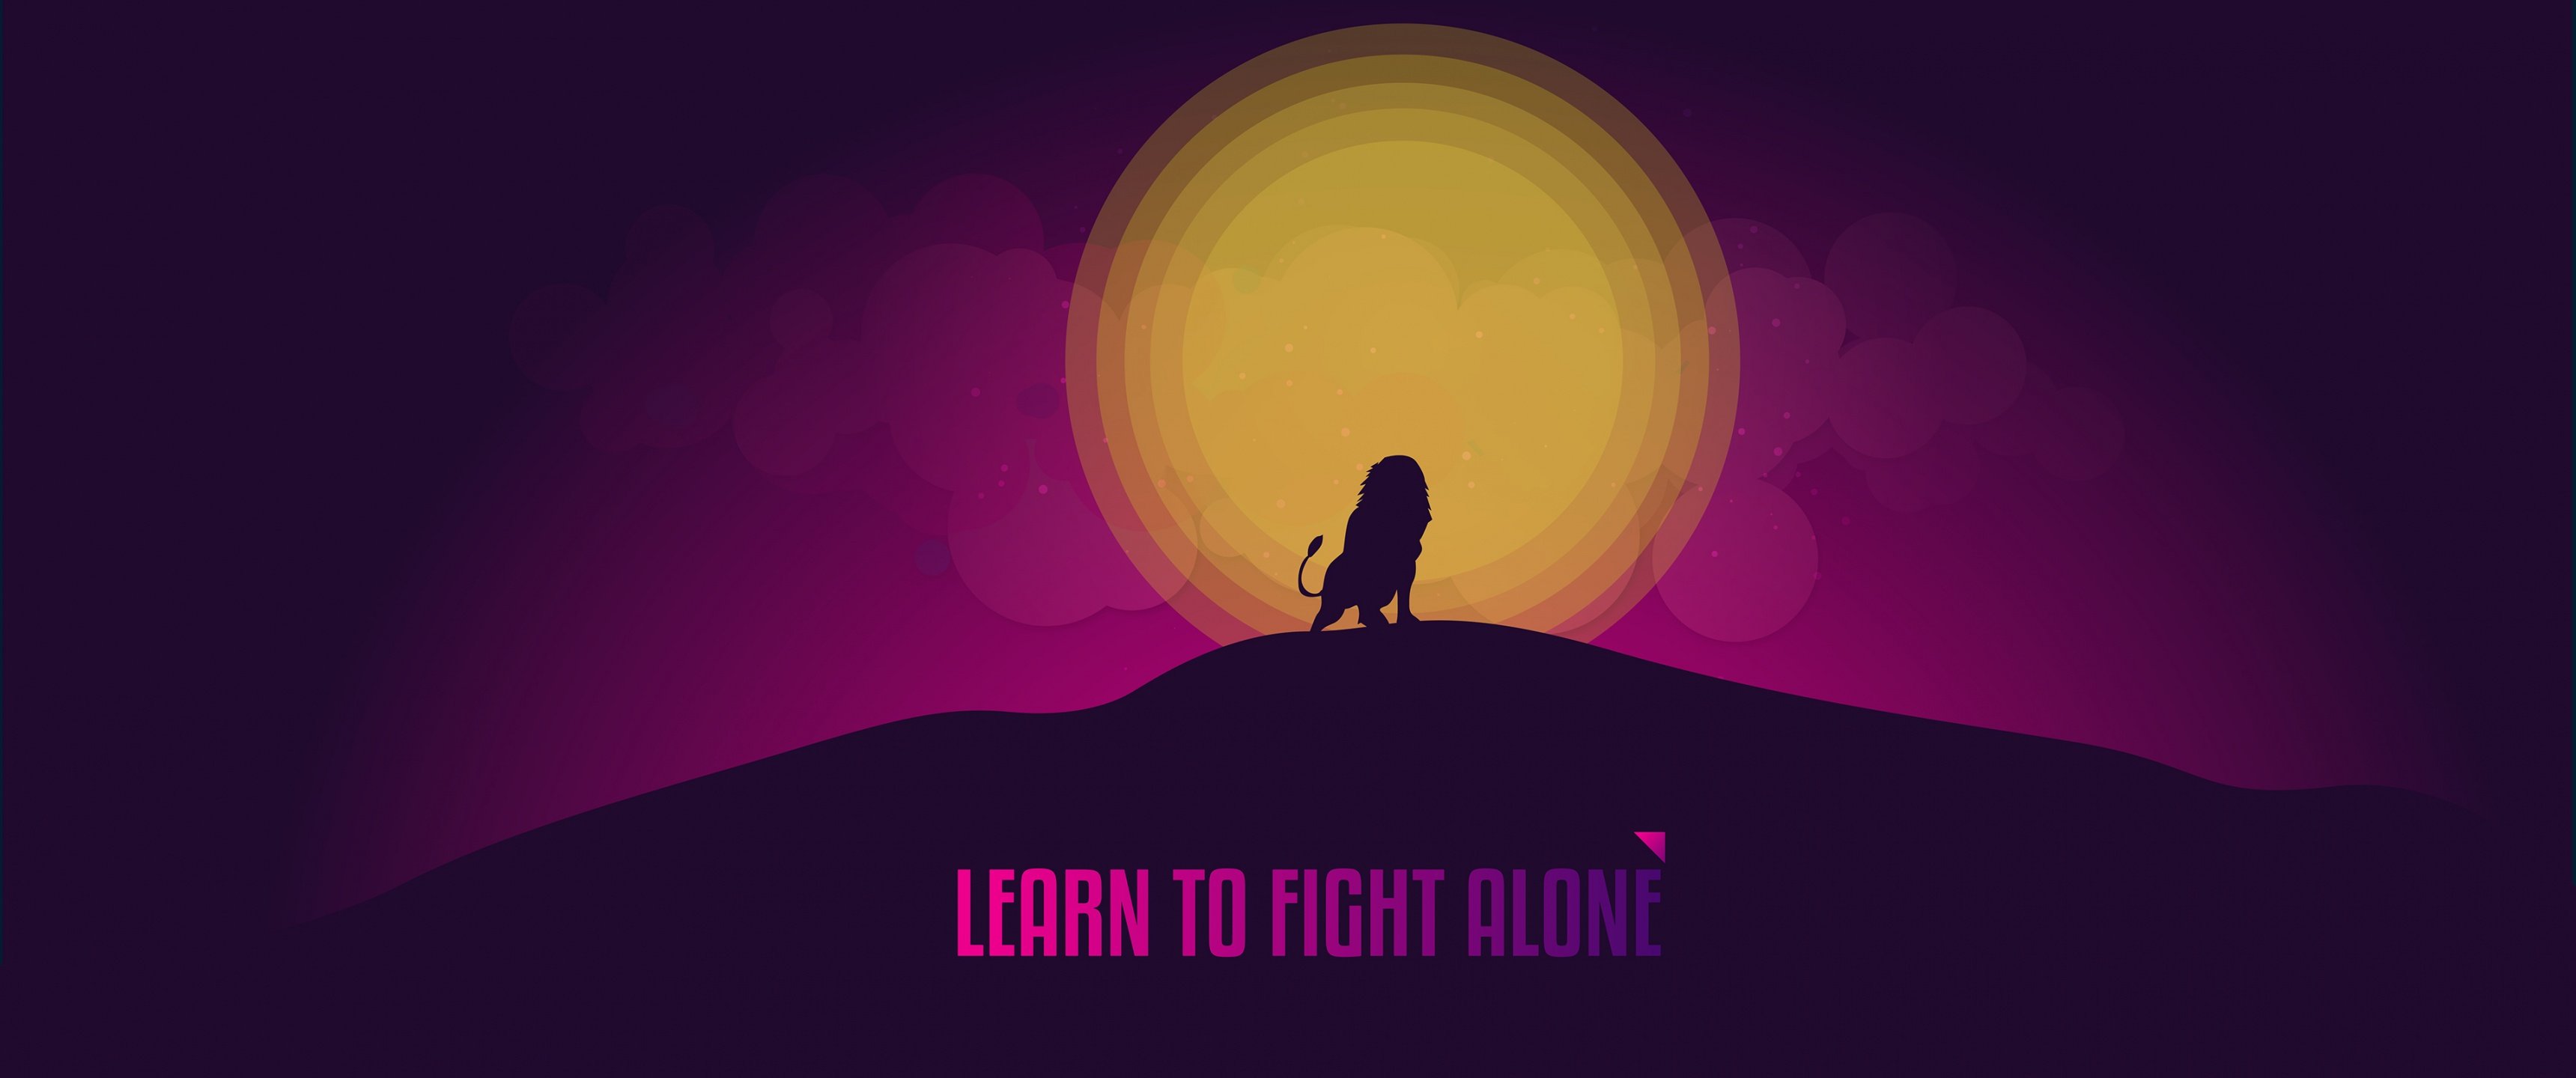 Learn to Fight Alone Wallpaper 4K, Popular quotes, Quotes